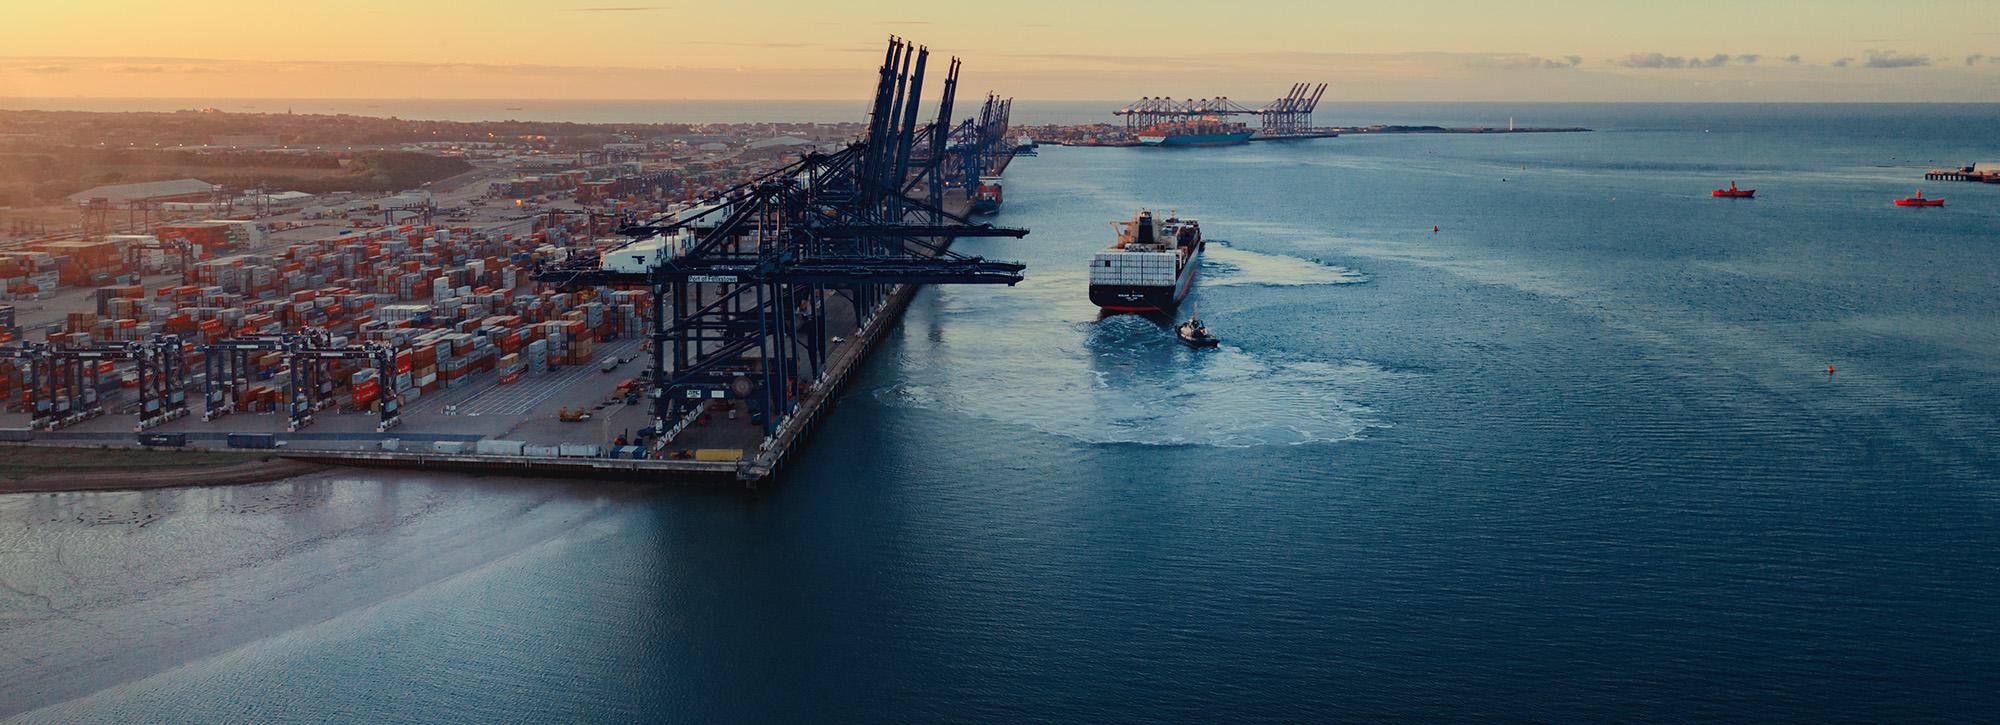 View of  Felixstowe Container port in operation